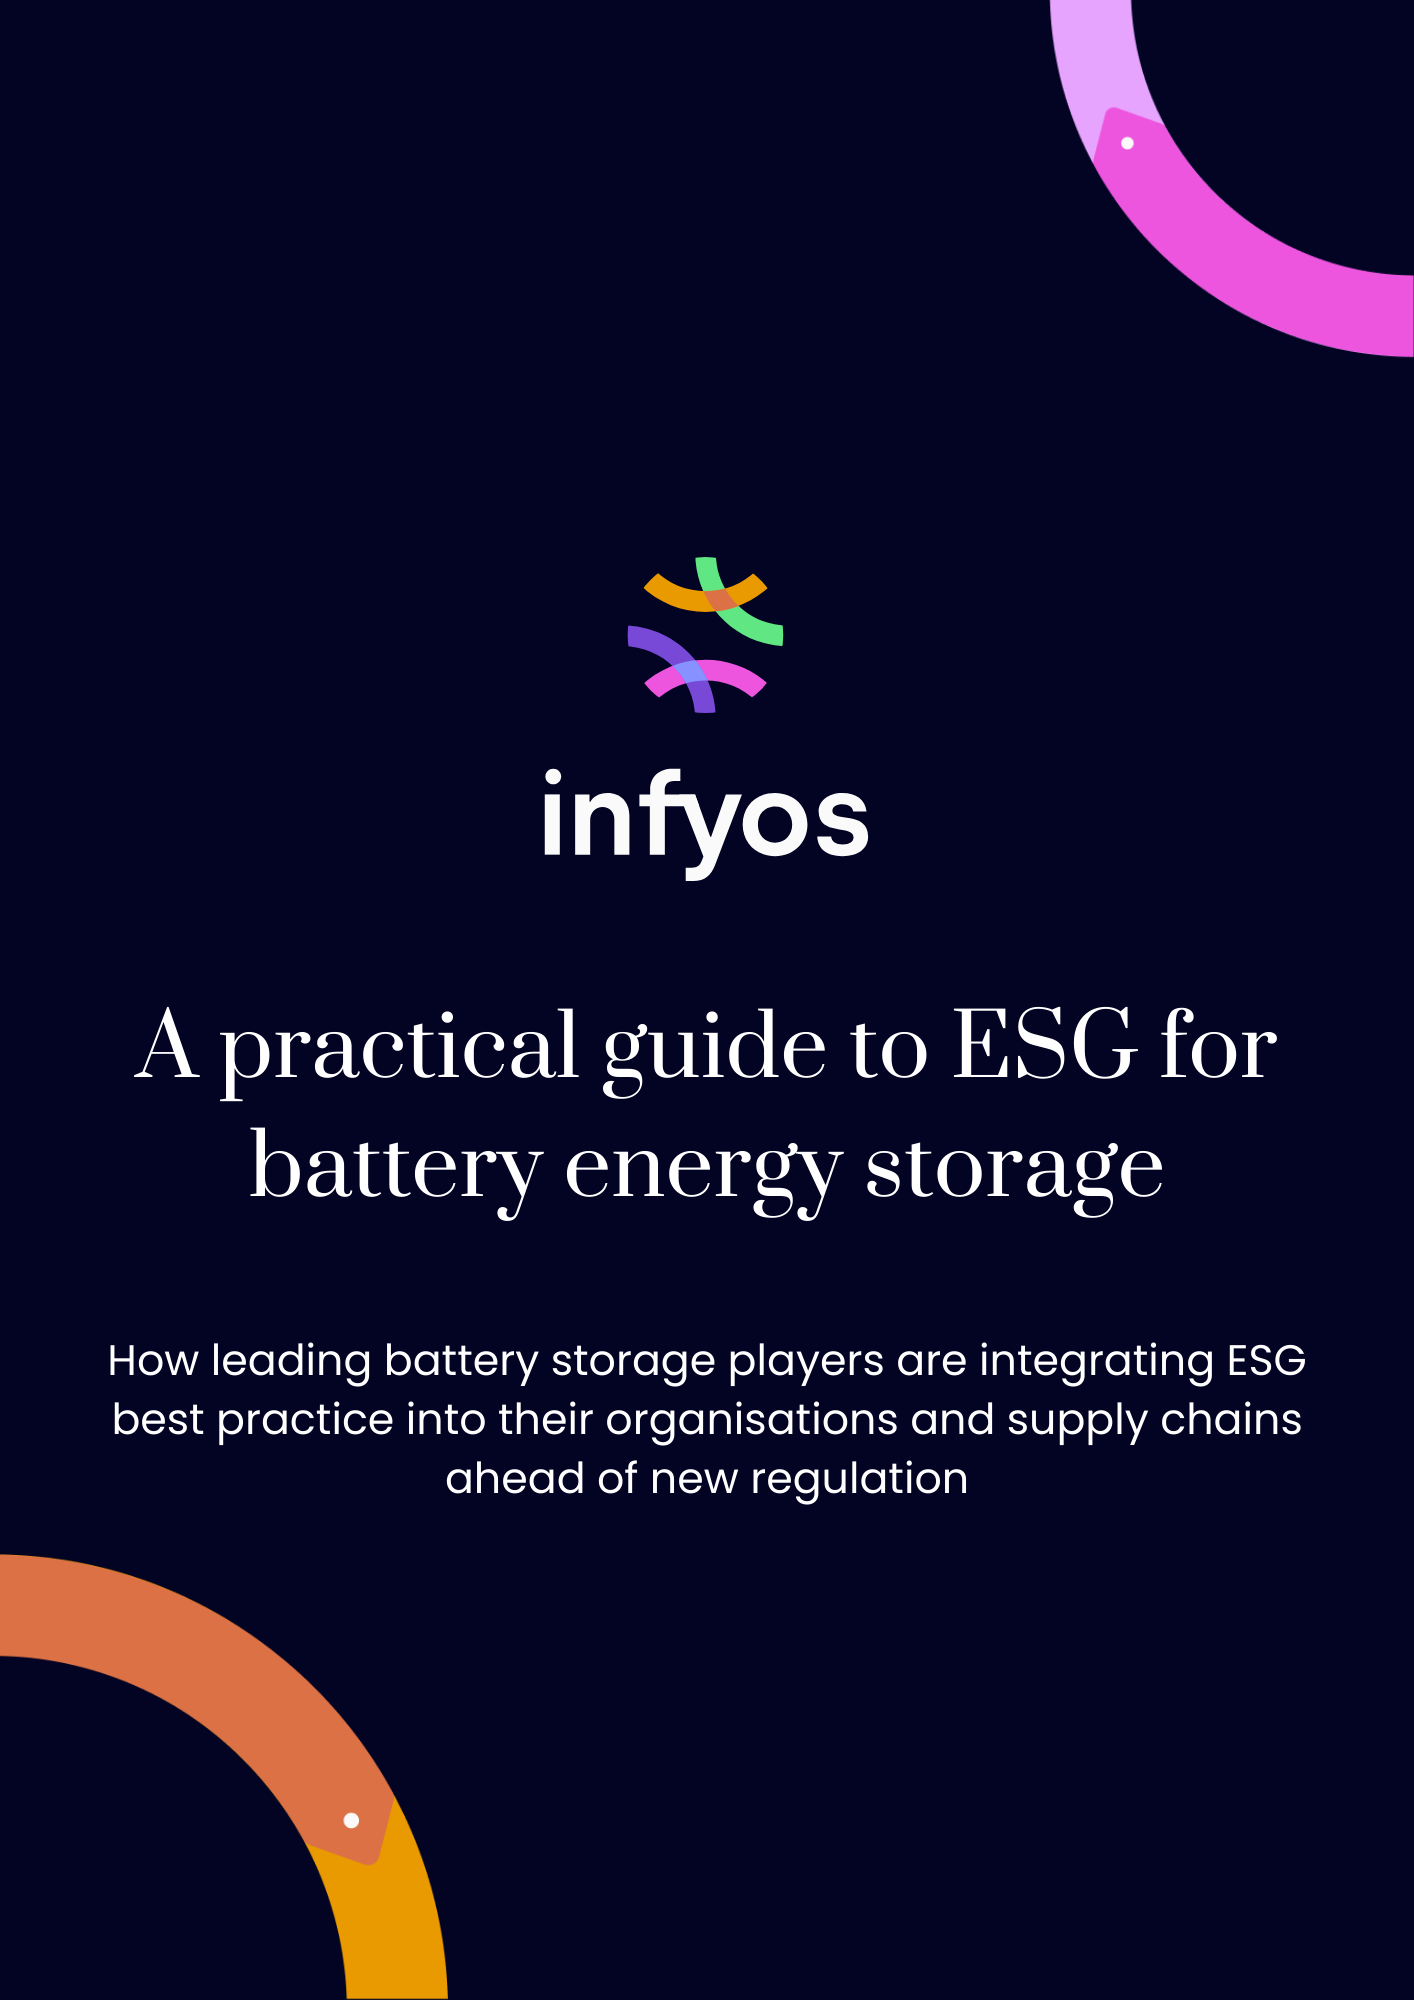 A practical guide to ESG for battery energy storage